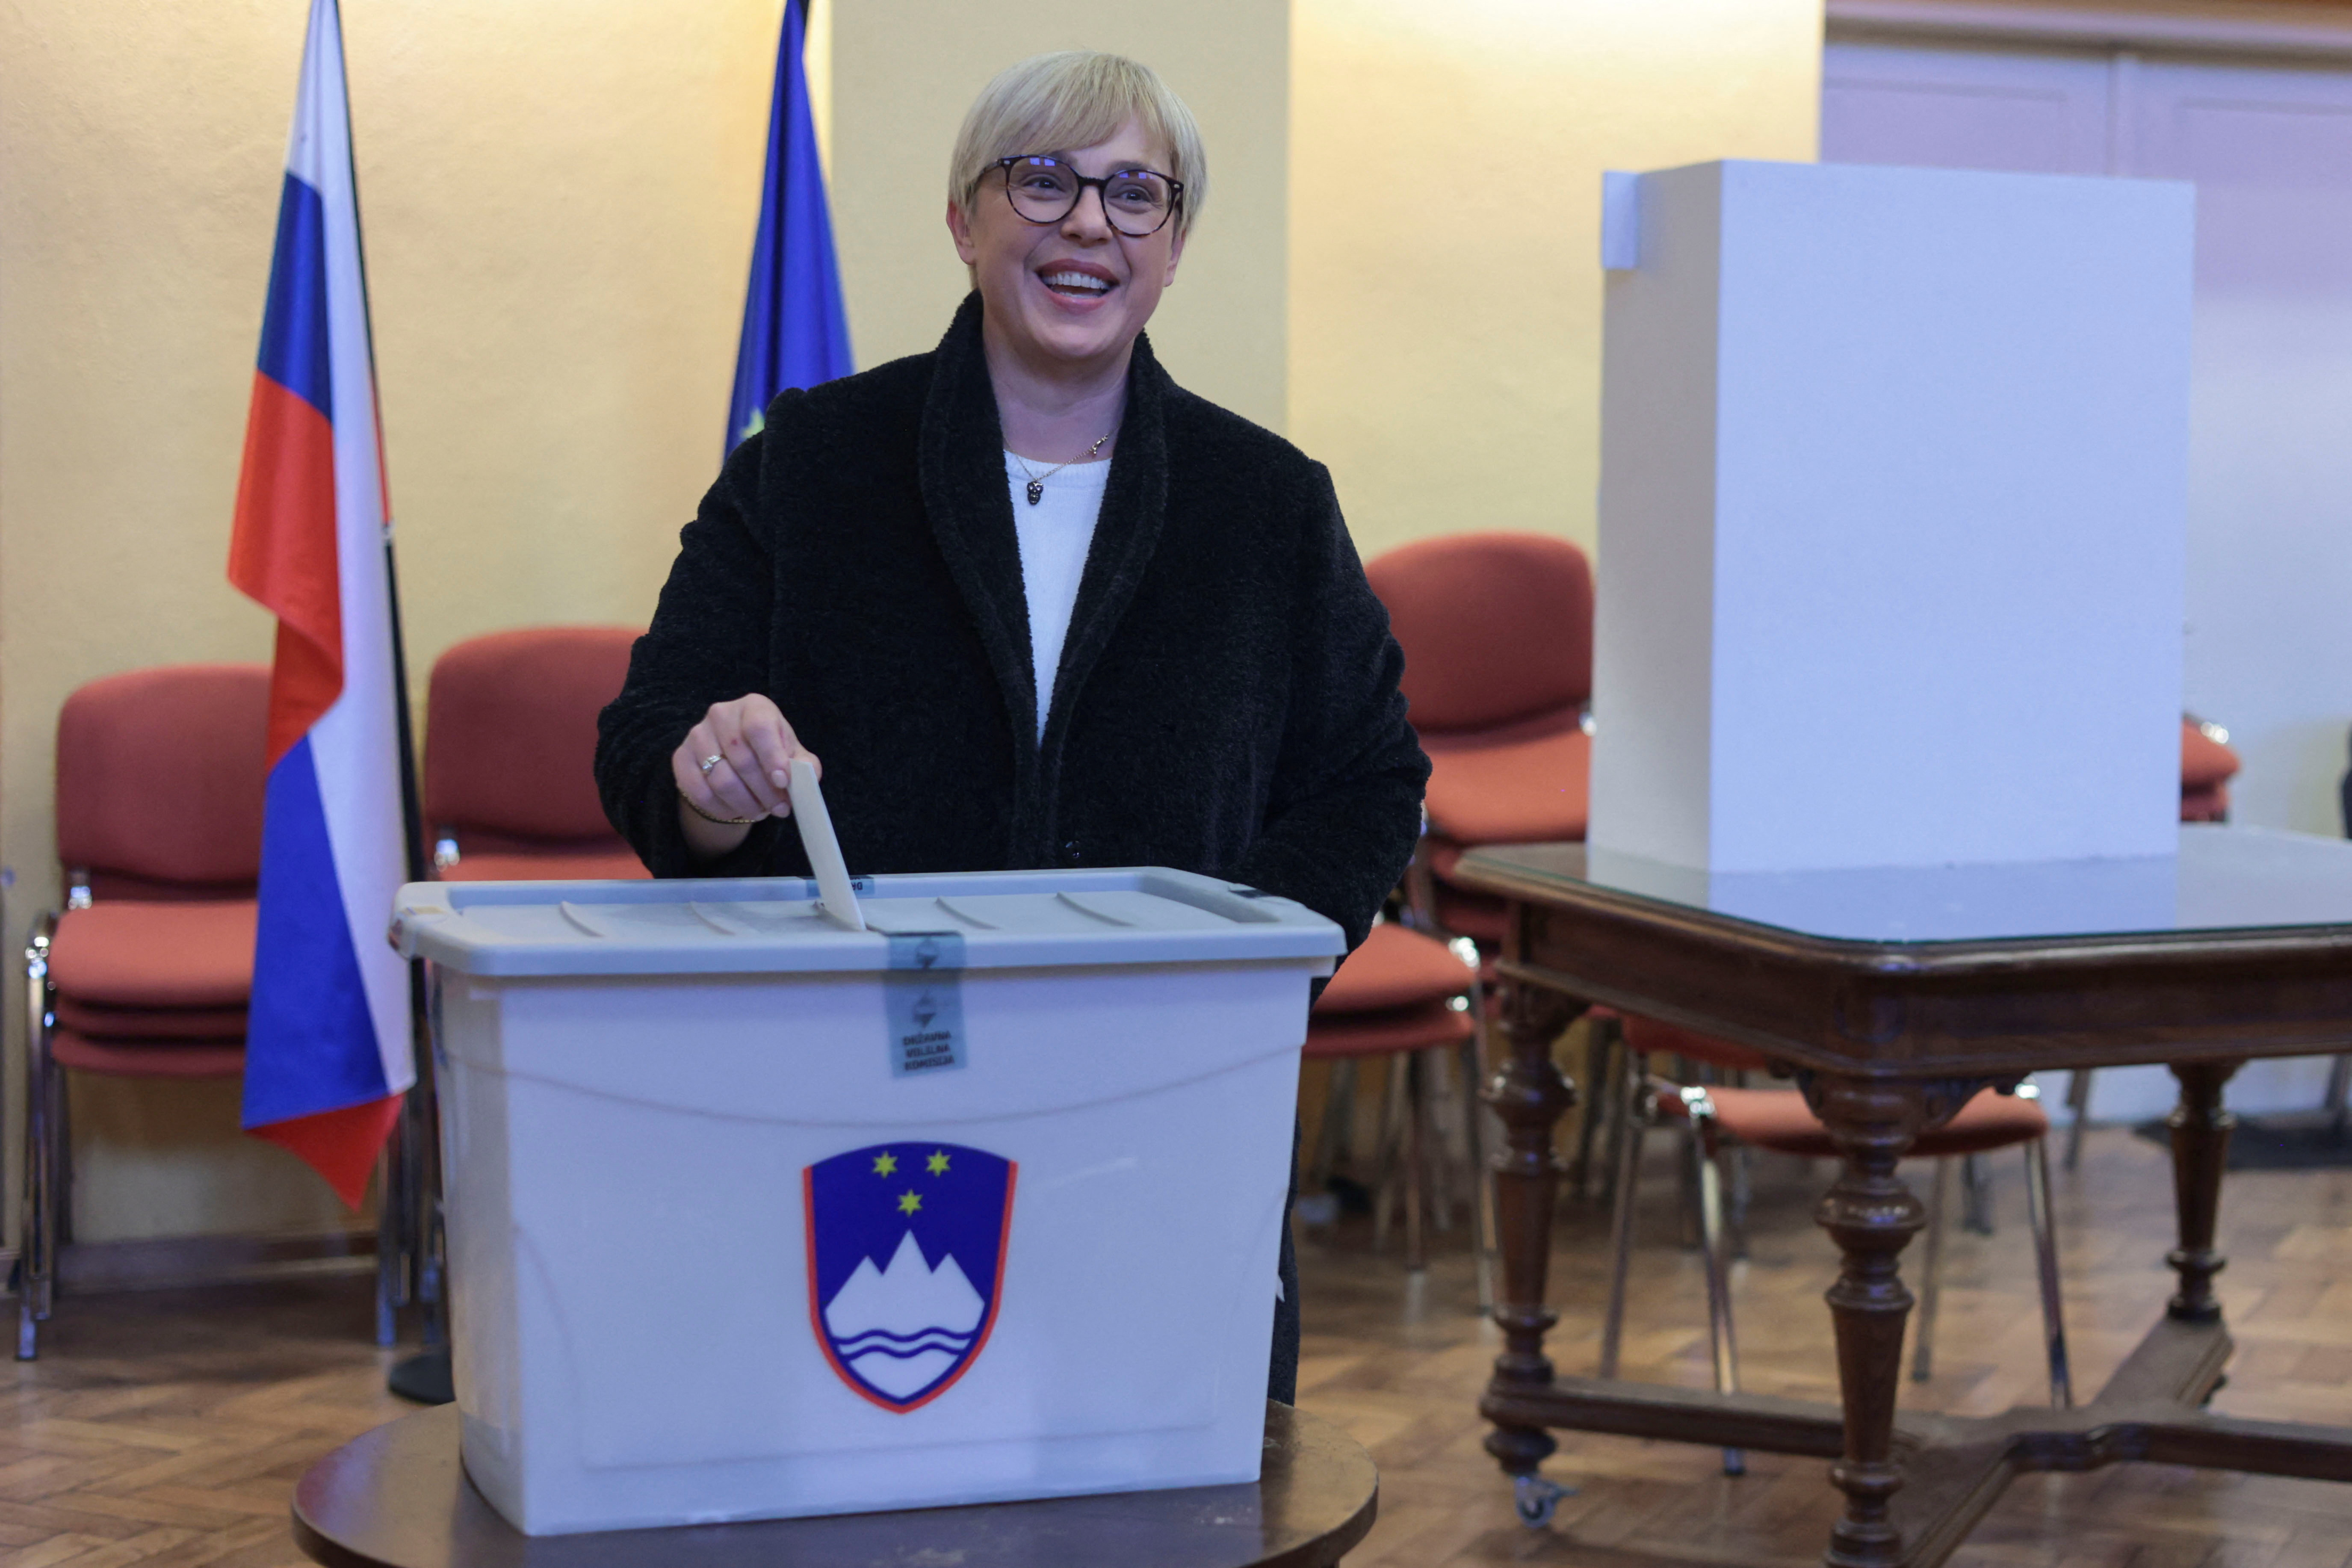 Slovenia holds presidential elections